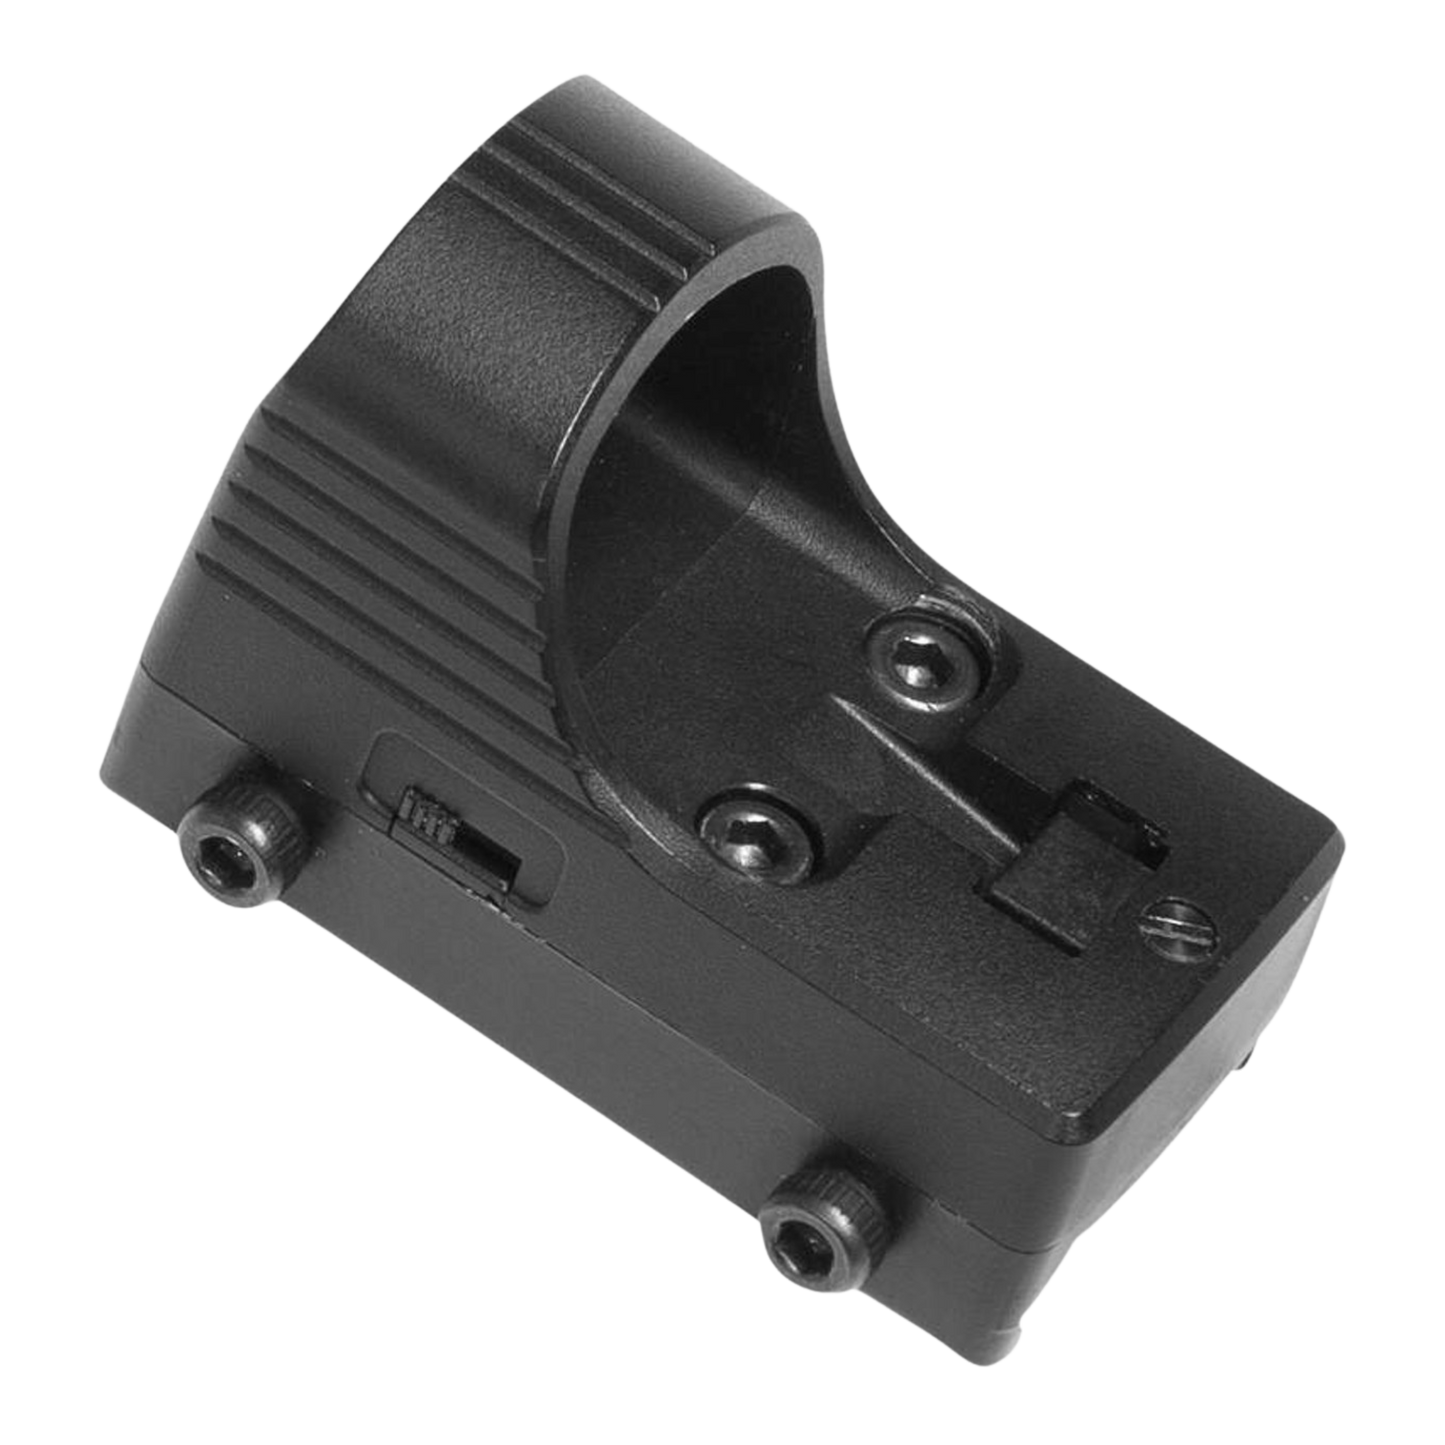 ASG Airsoft Micro Red Dot Sight